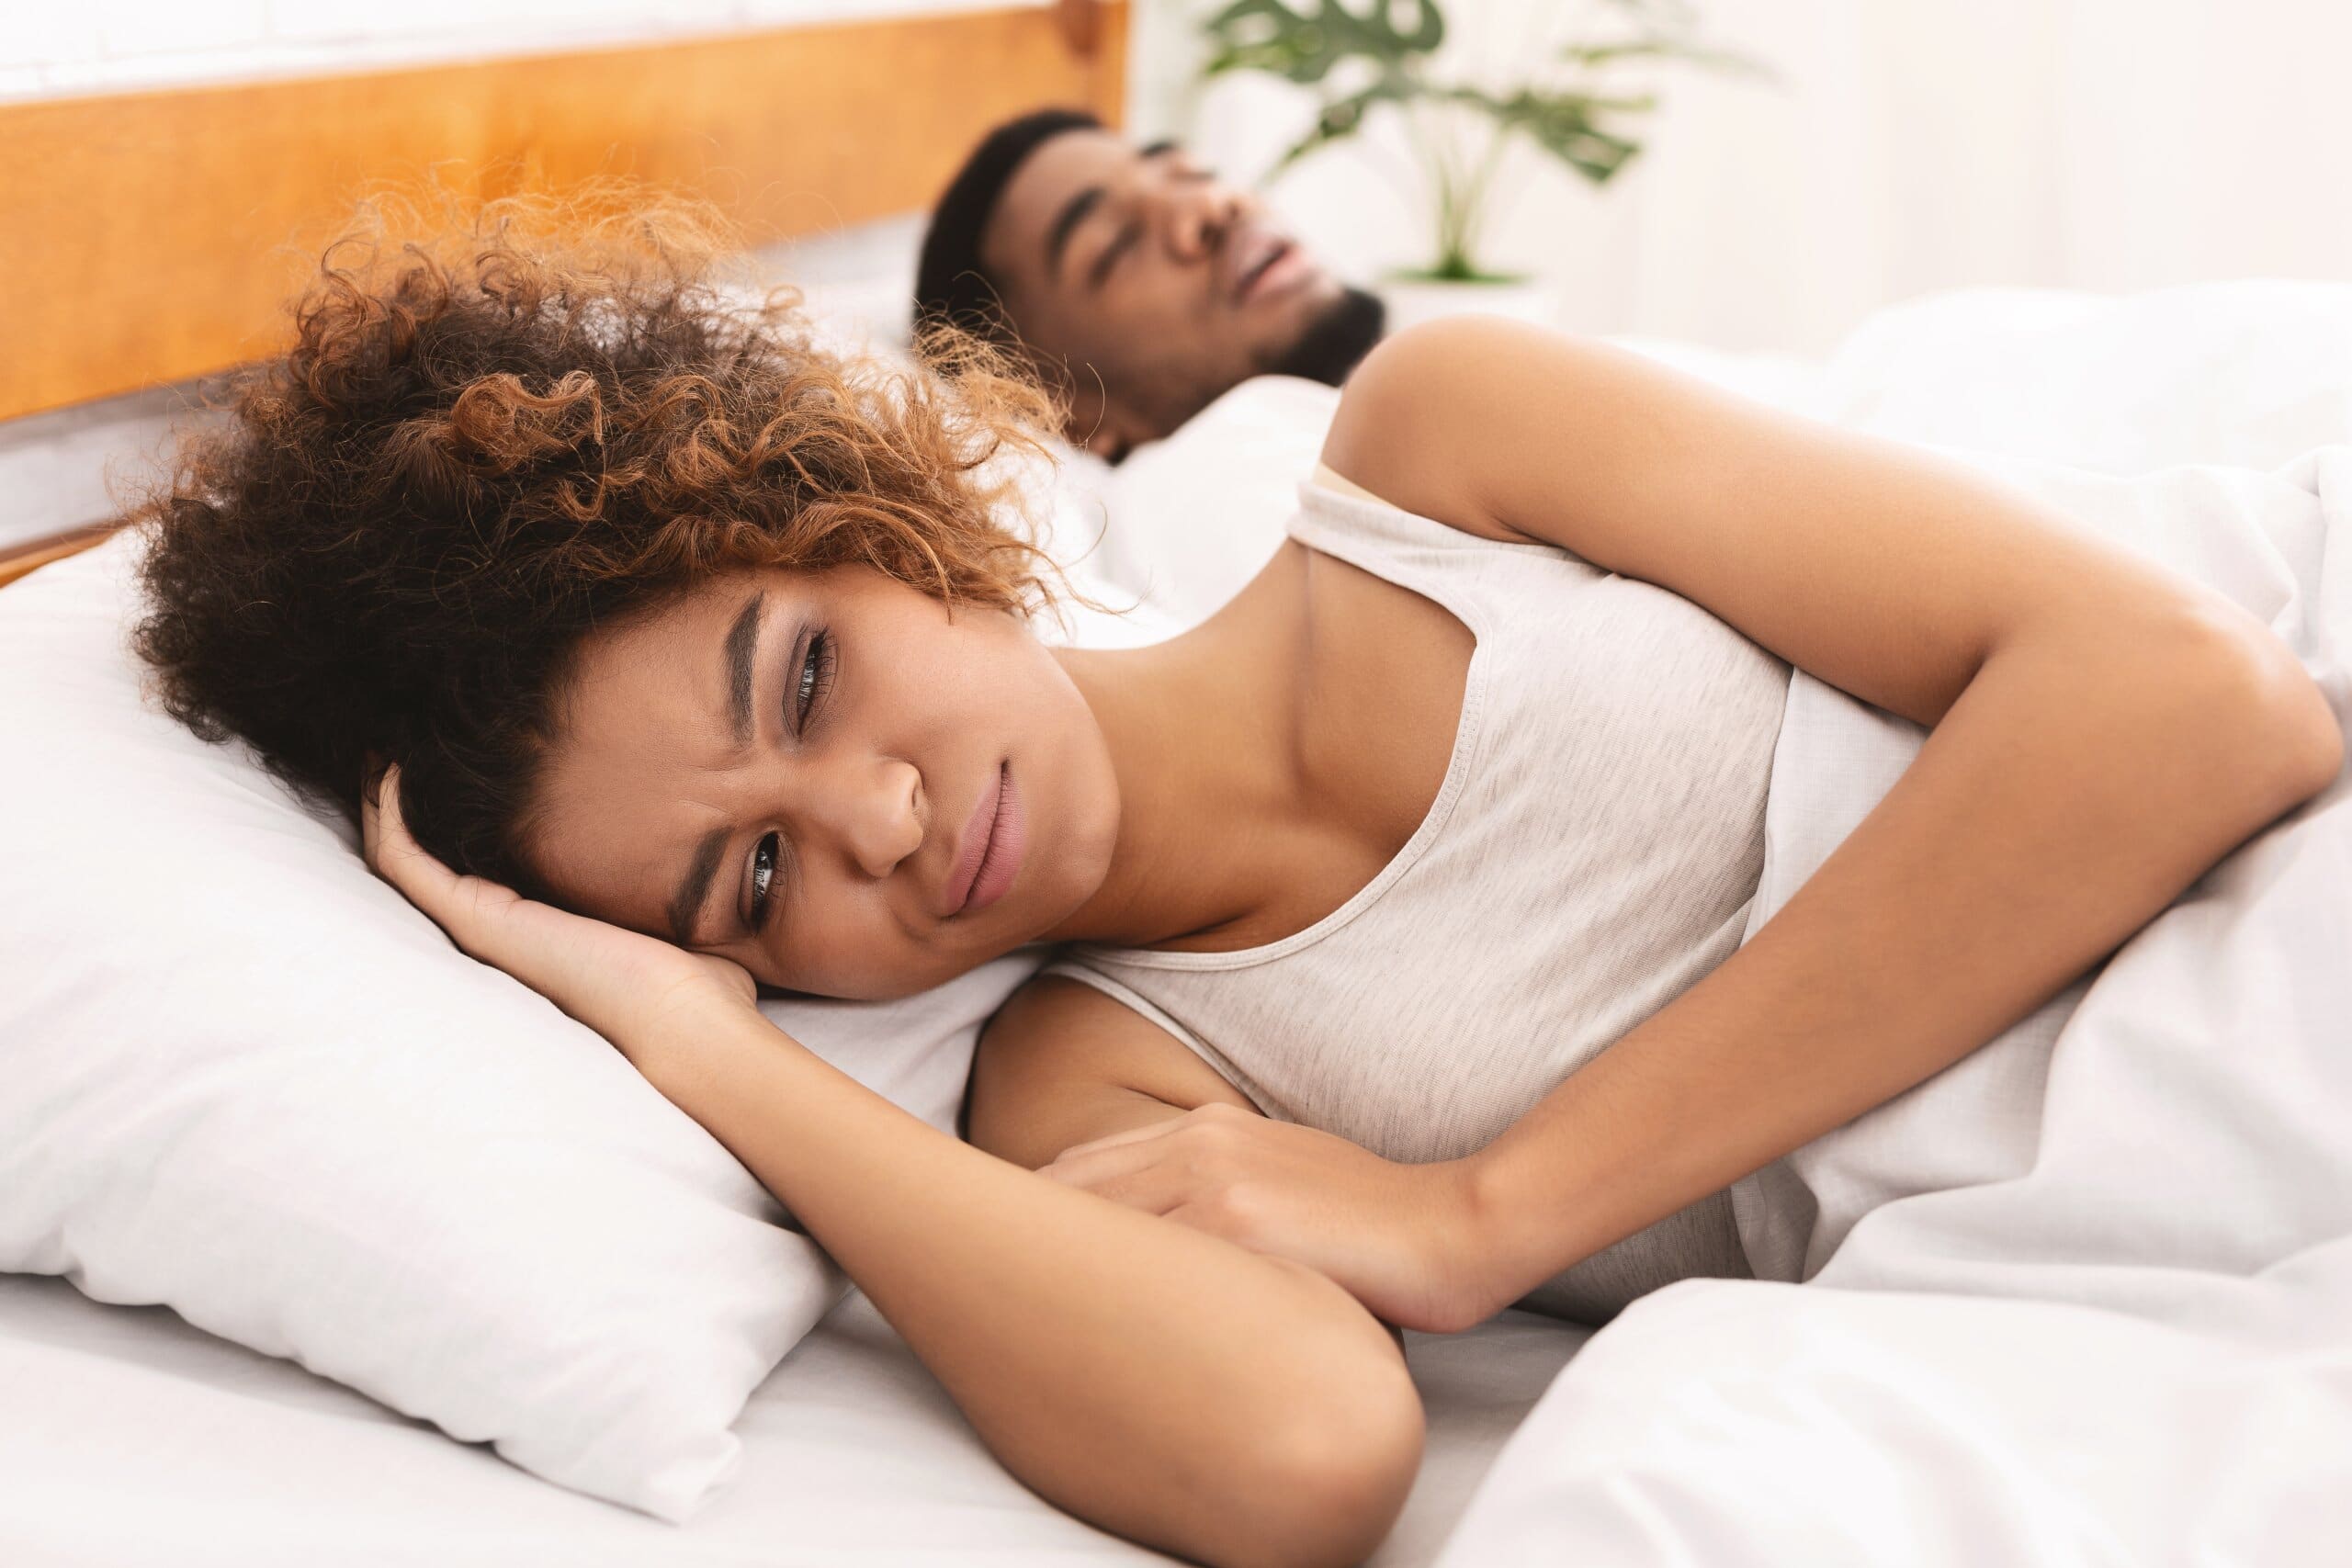 Woman looking annoyed as her partner sleeps next to her snoring.